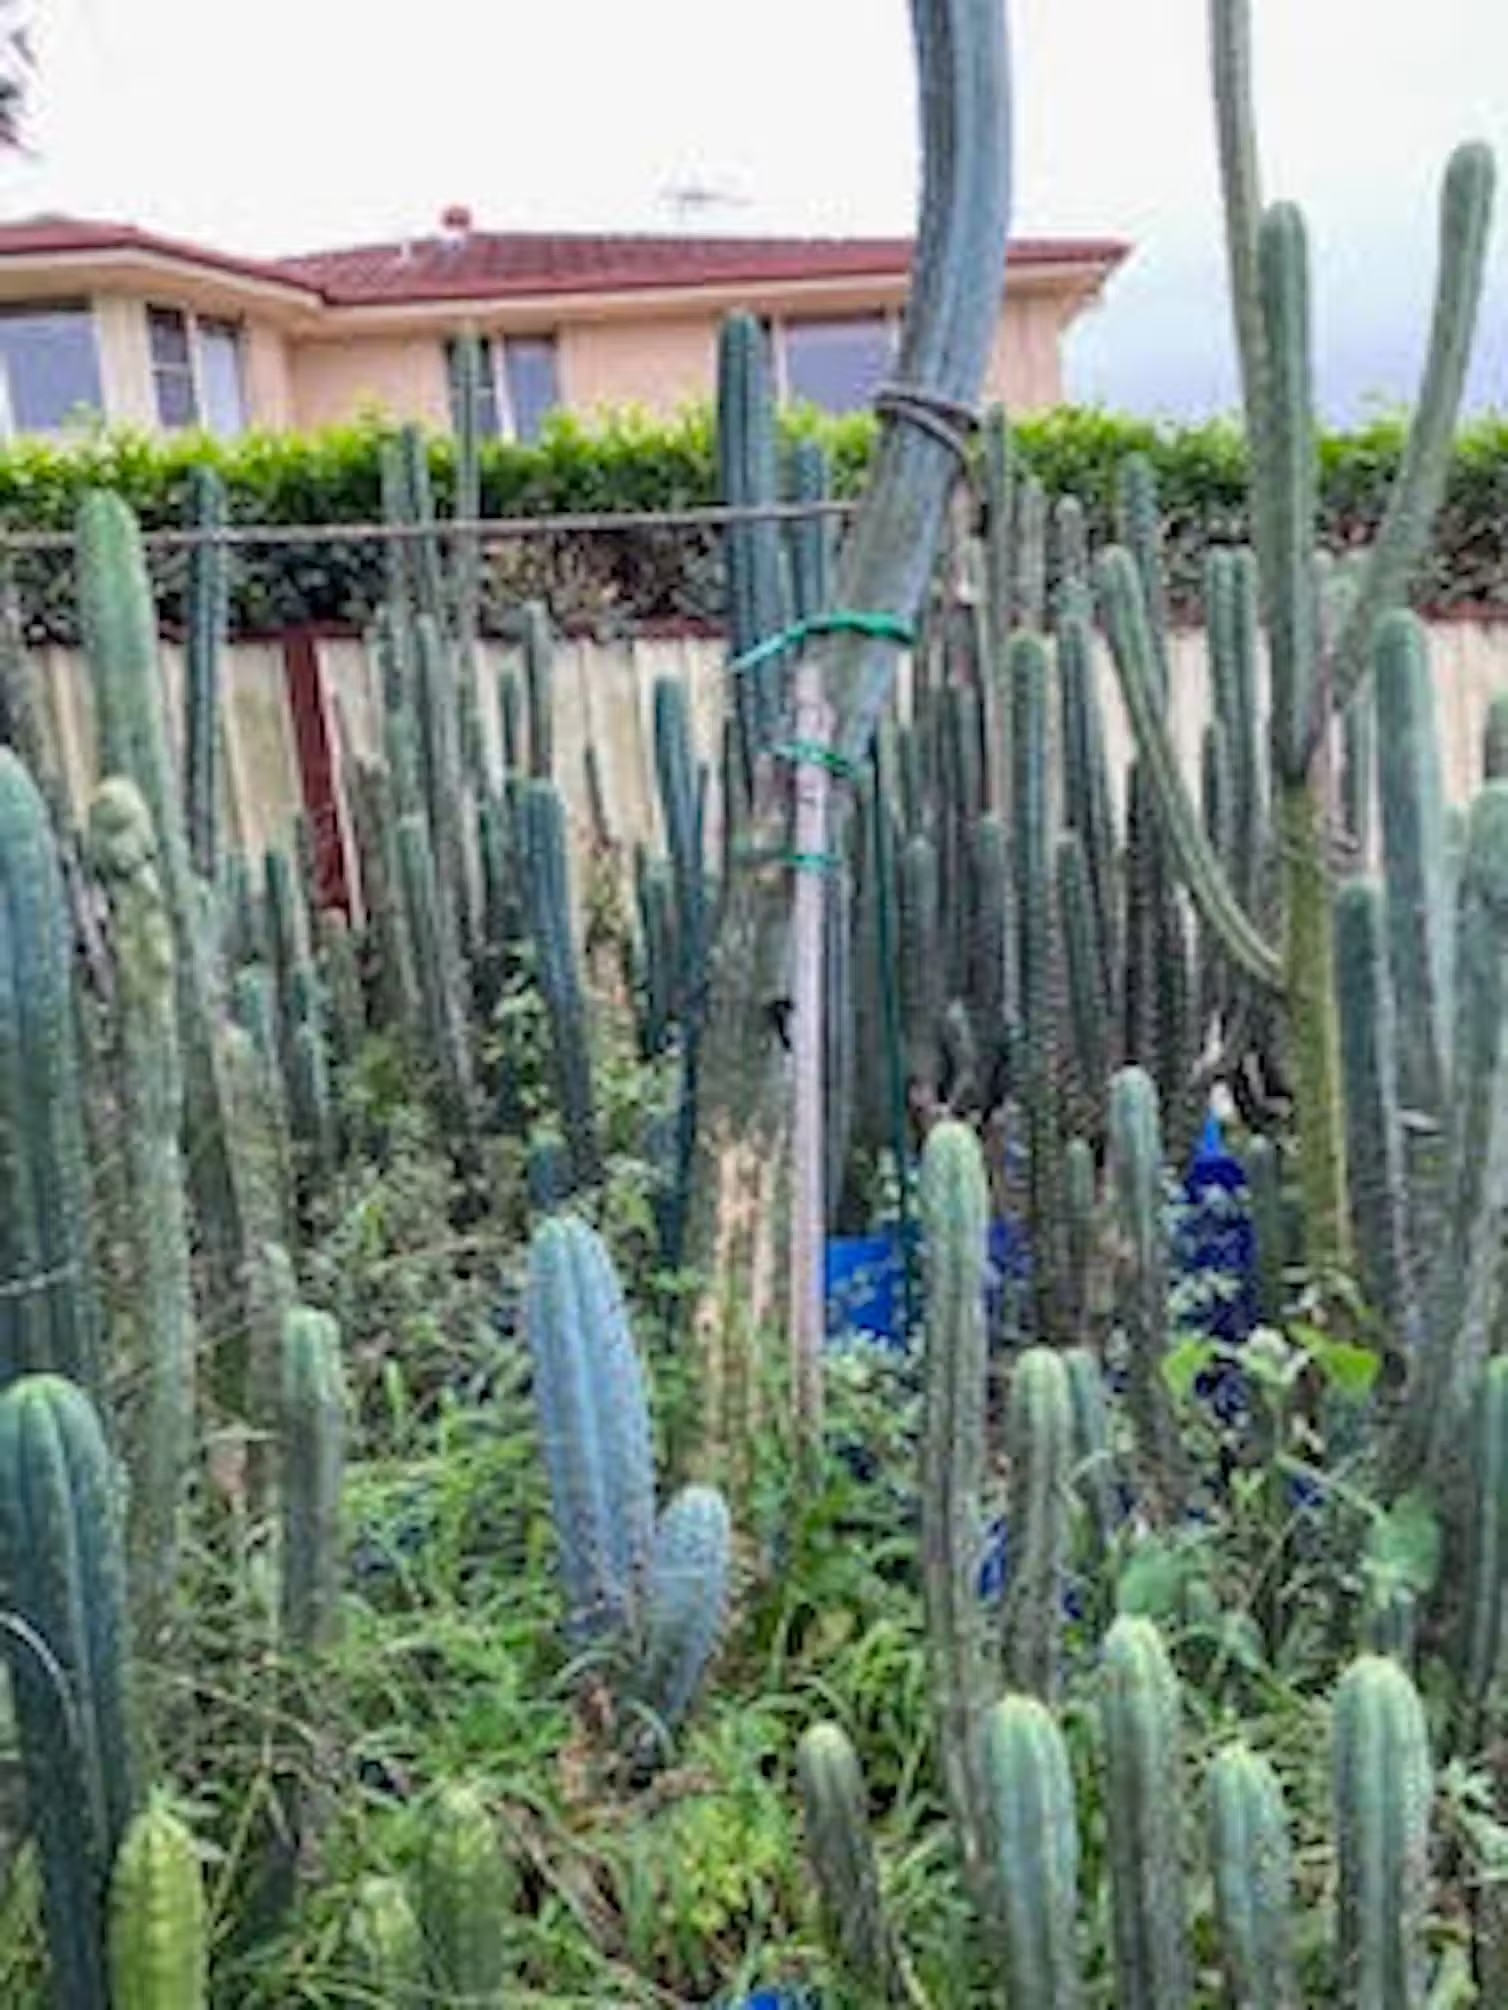 A garden full of silvery blue and green cacti